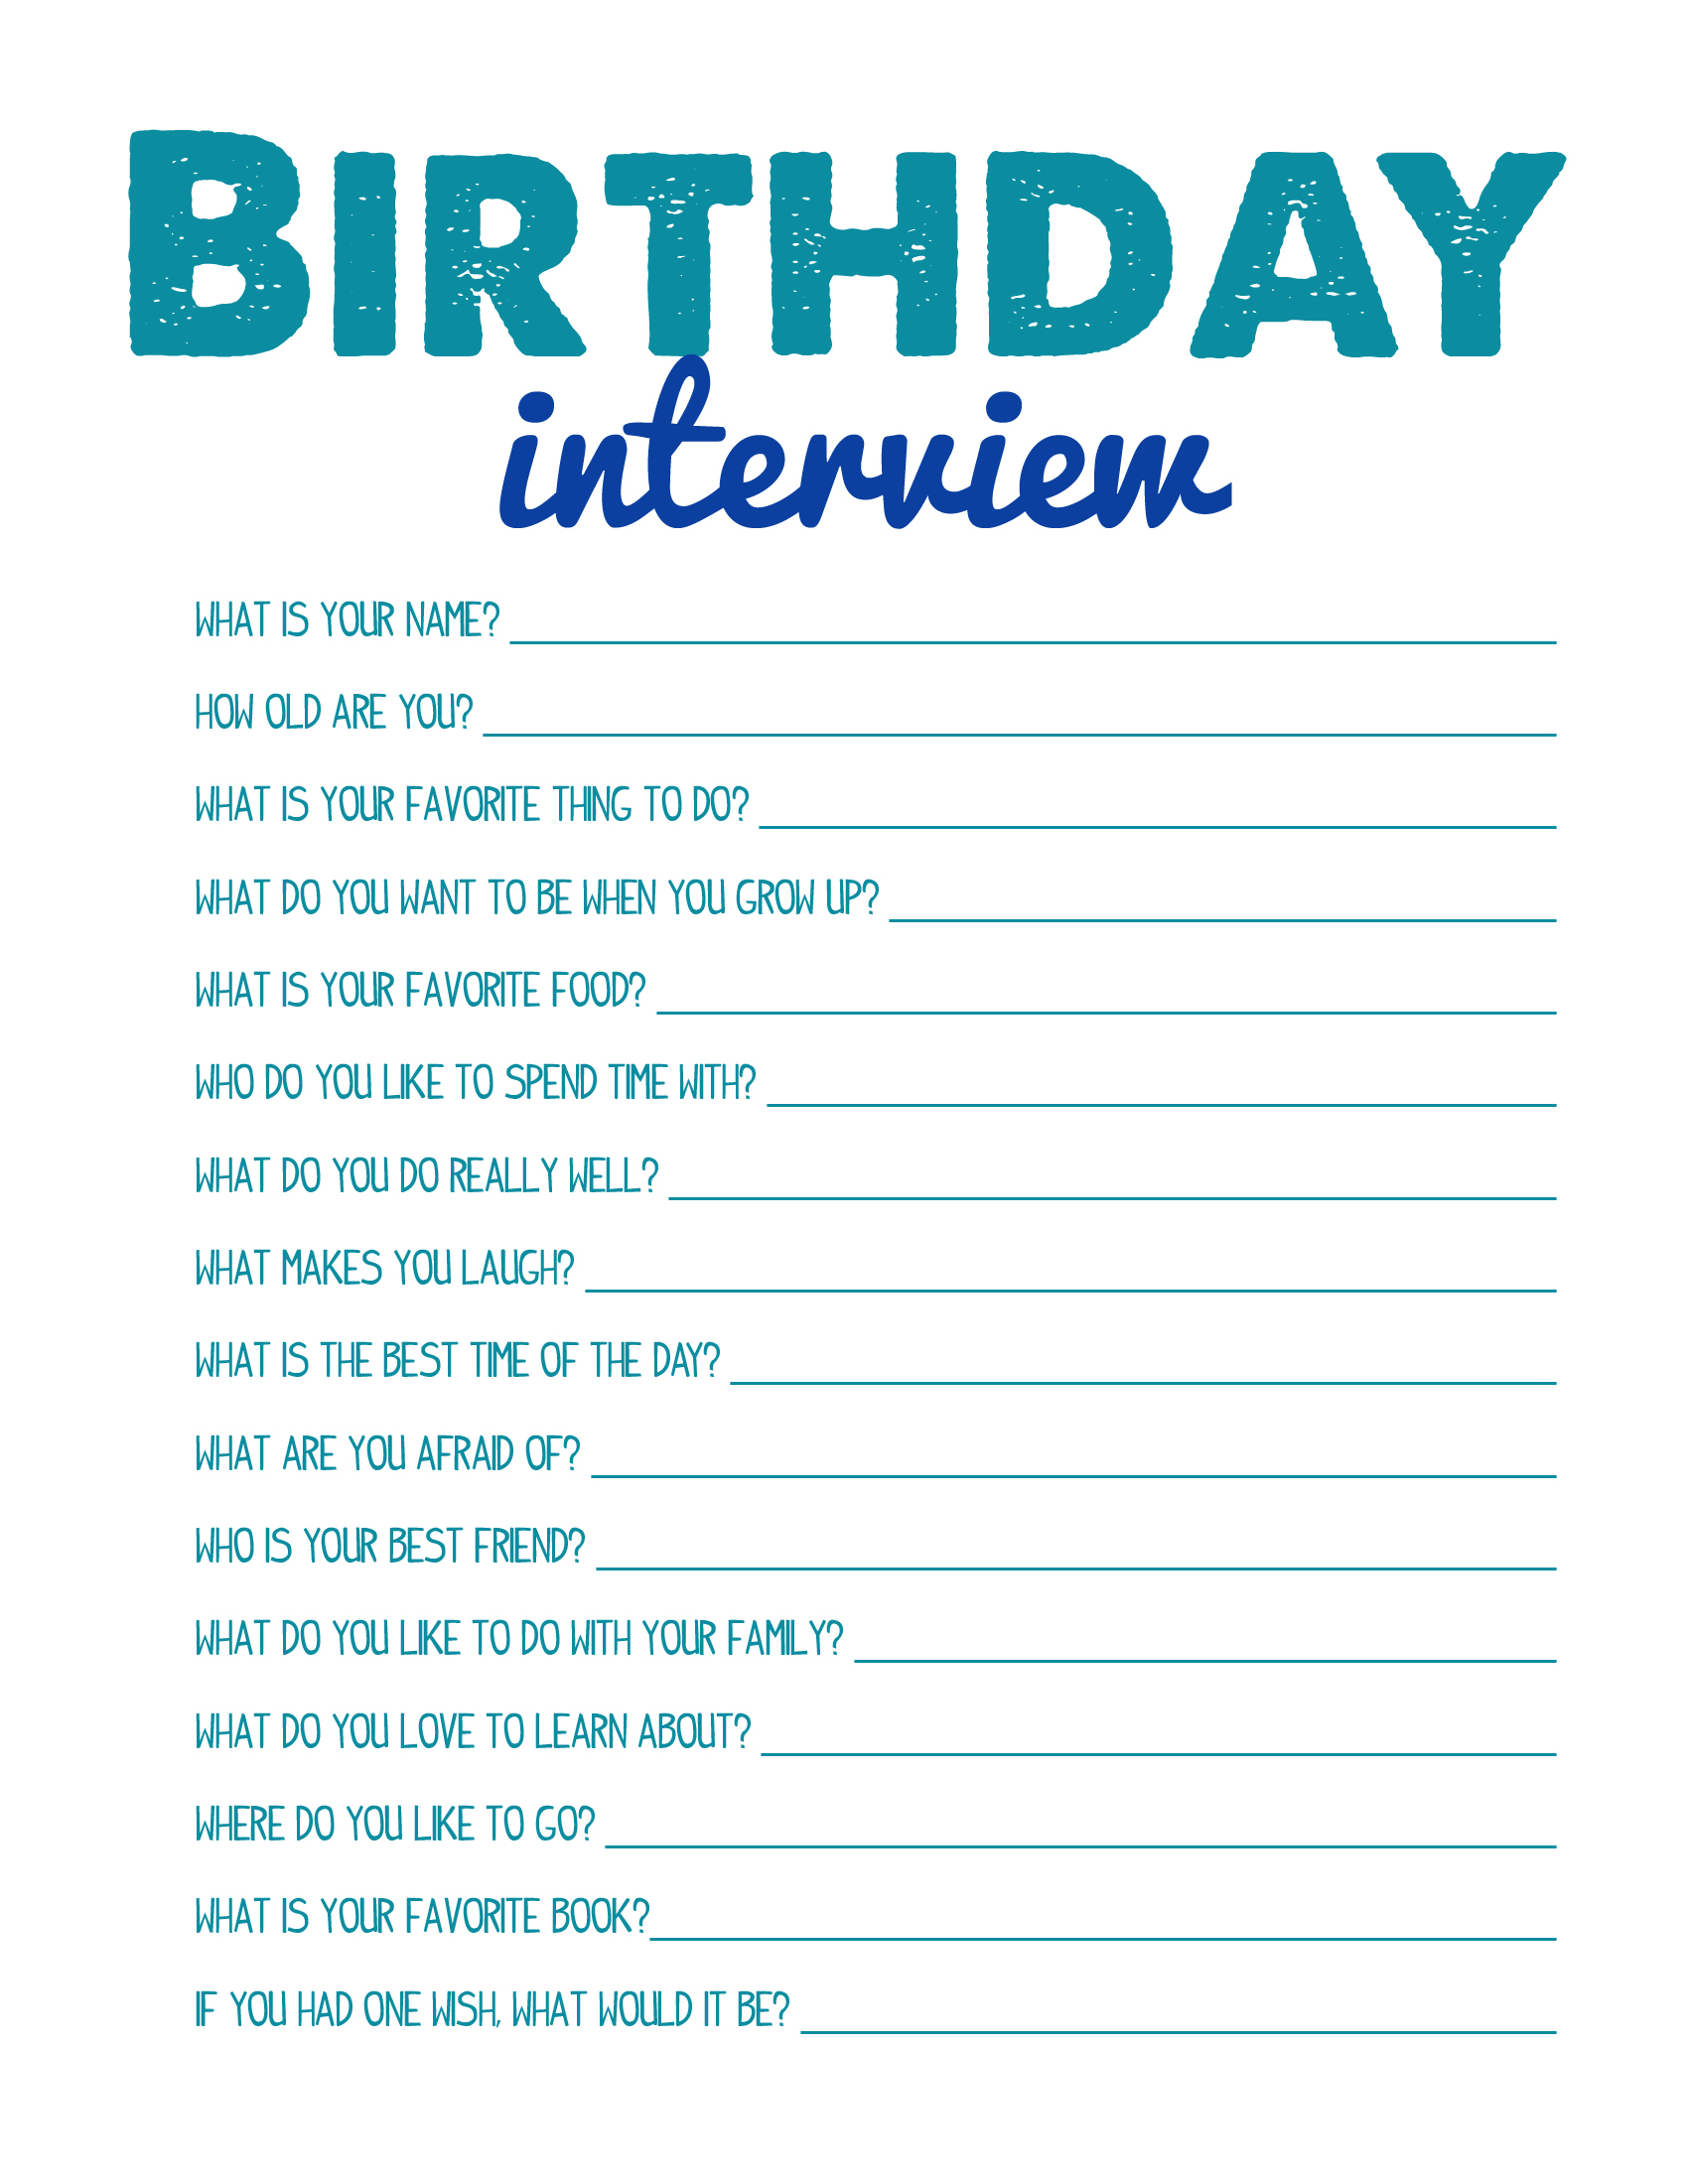 Free Birthday Questionnaire Printable